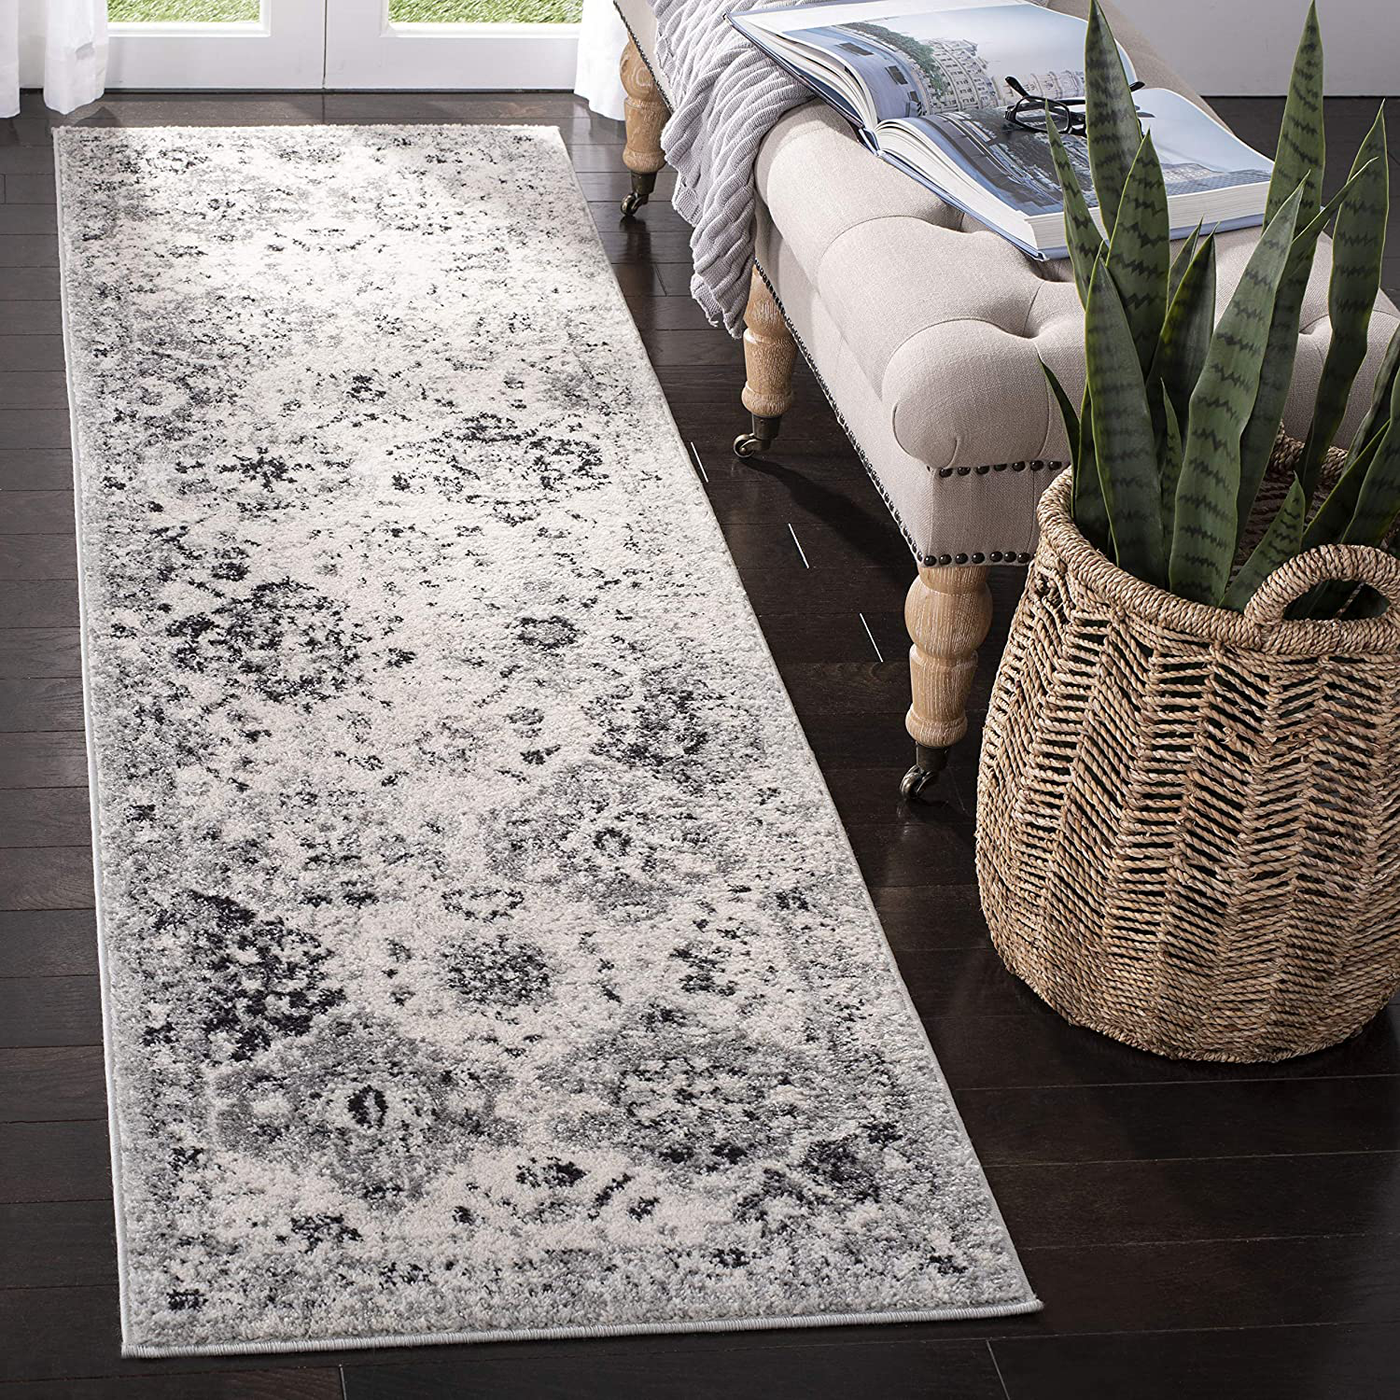 Safavieh Madison Collection MAD611G Boho Chic Floral Medallion Trellis Distressed Non-Shedding Stain Resistant Living Room Bedroom Runner, 2'3" x 16' , Silver / Grey